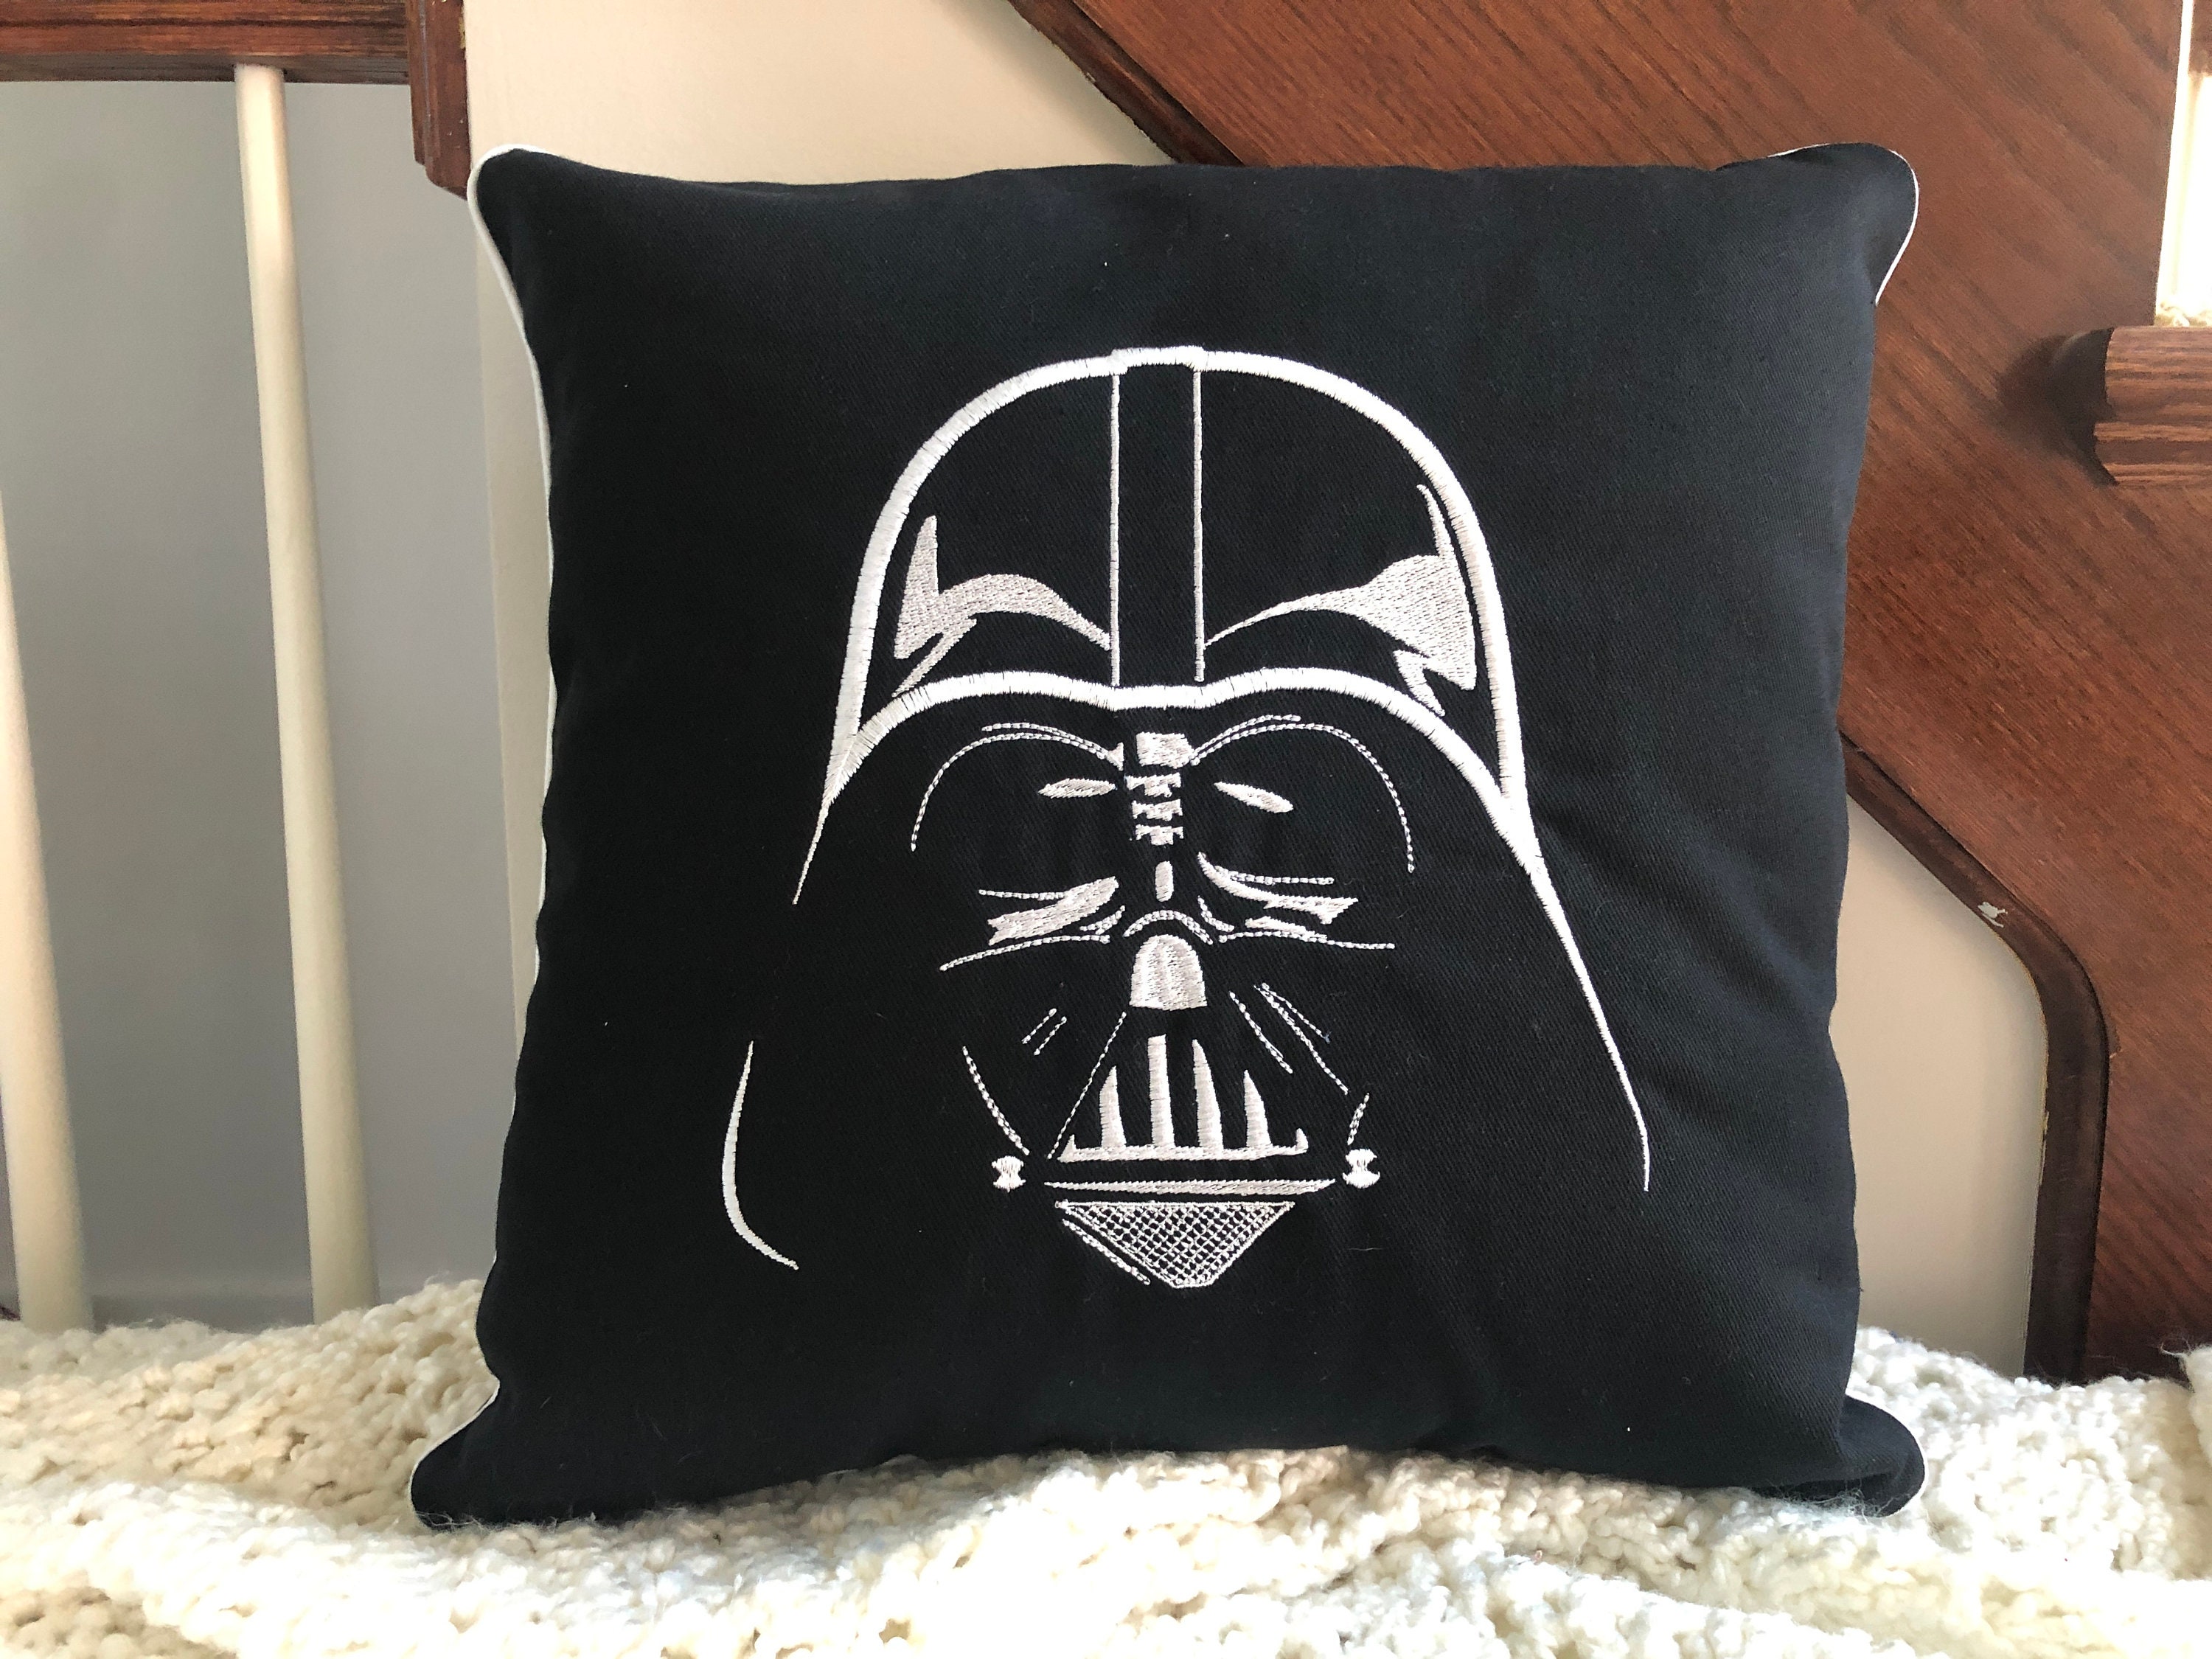 Ful Grey Star Wars Darth Vader and Storm Trooper Portable Neck Pillow